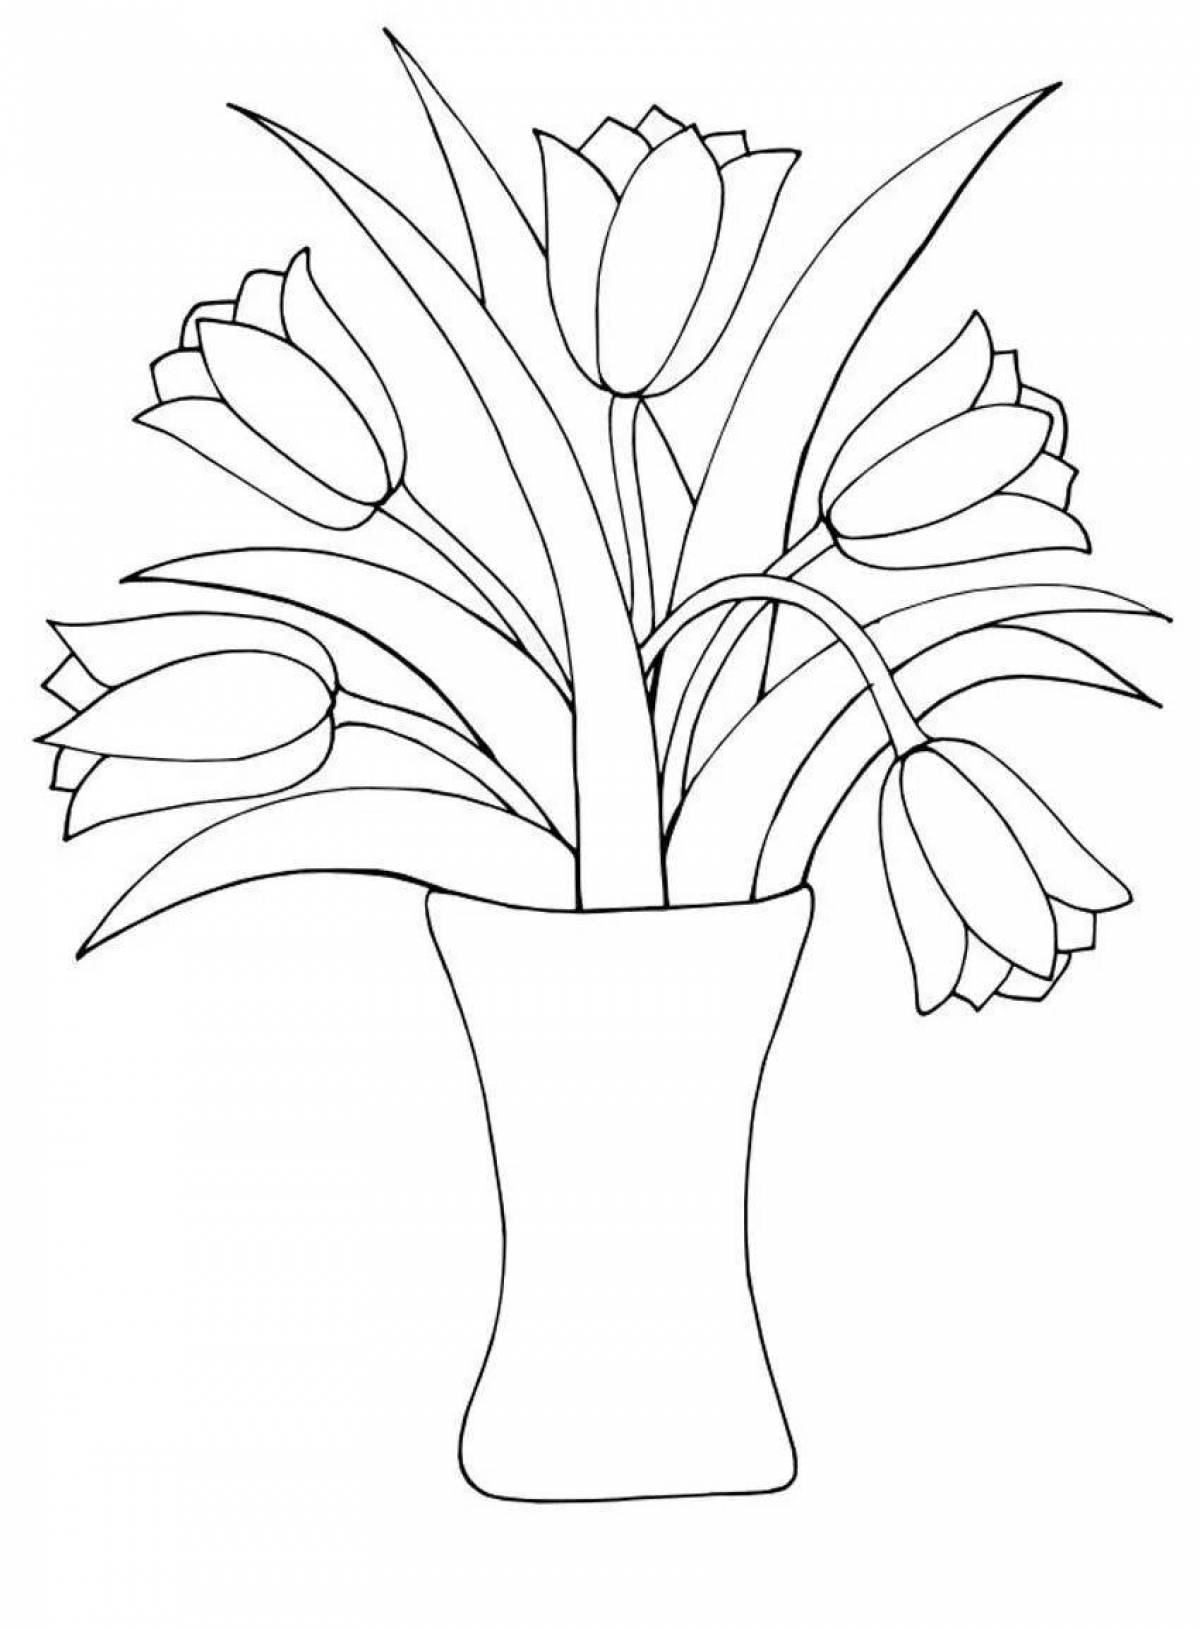 A fascinating vase of flowers coloring book for children